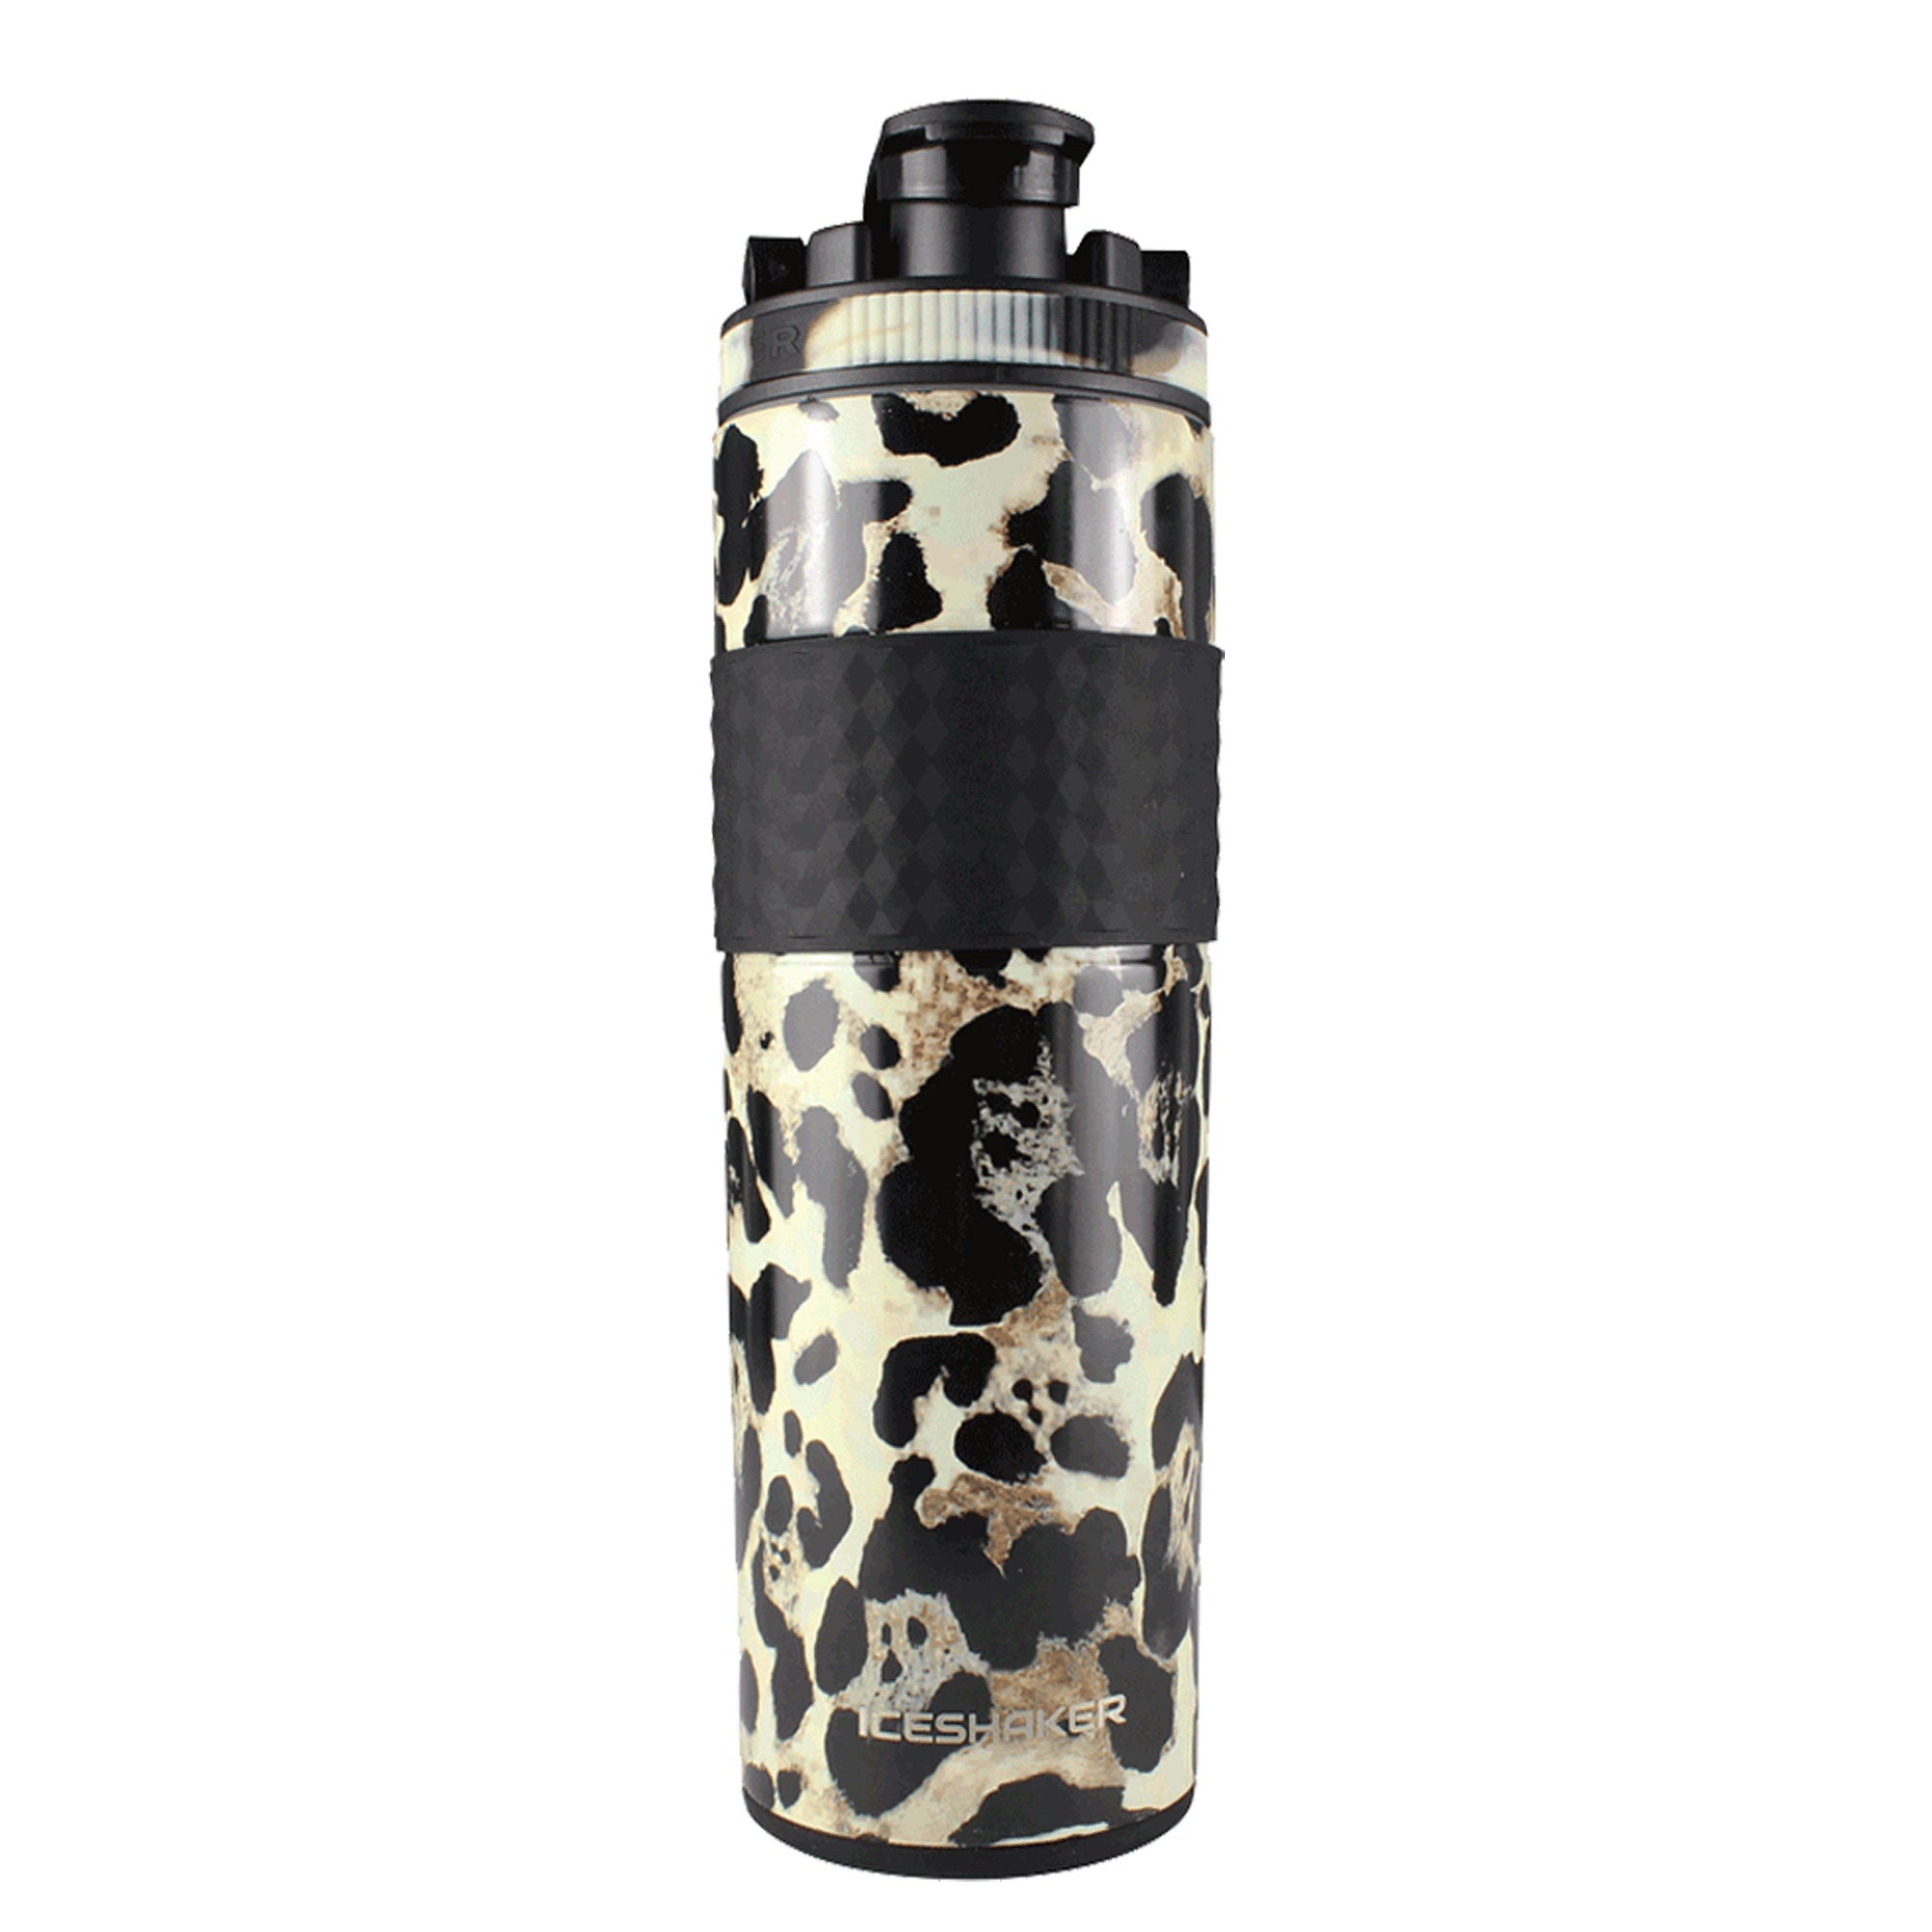 Ice Shaker Double Walled Vacuum Insulated, Skinny Protein Shaker